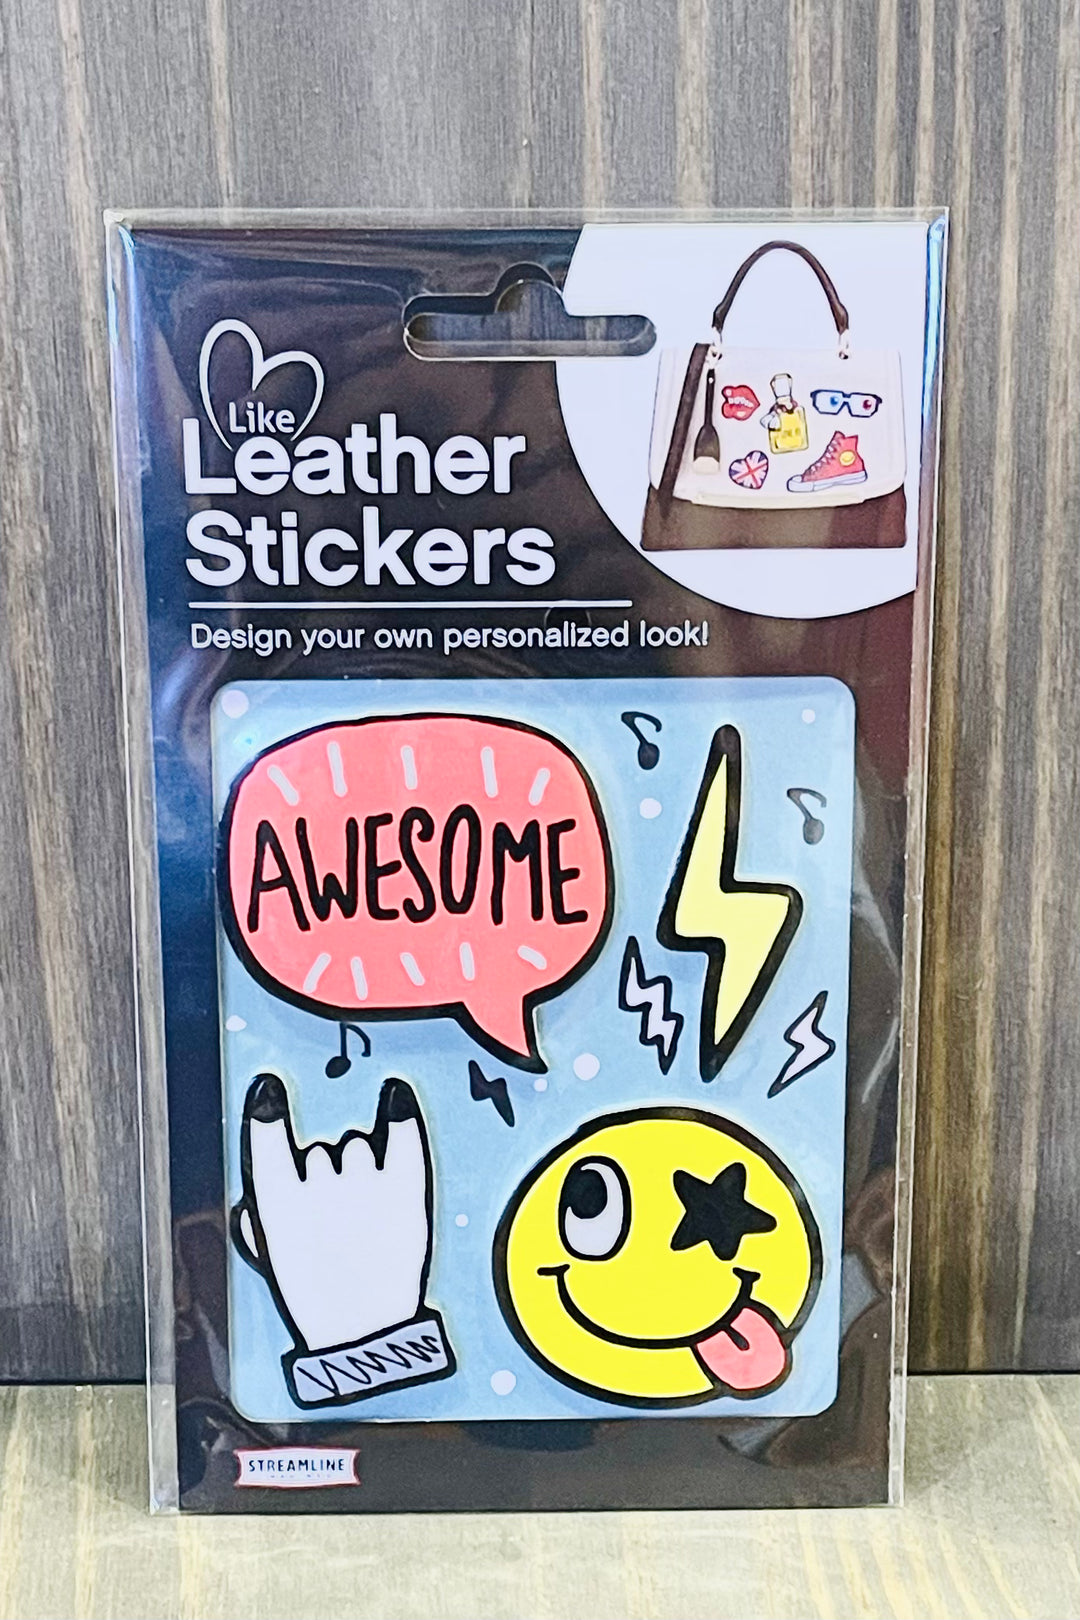 Like Leather Stickers